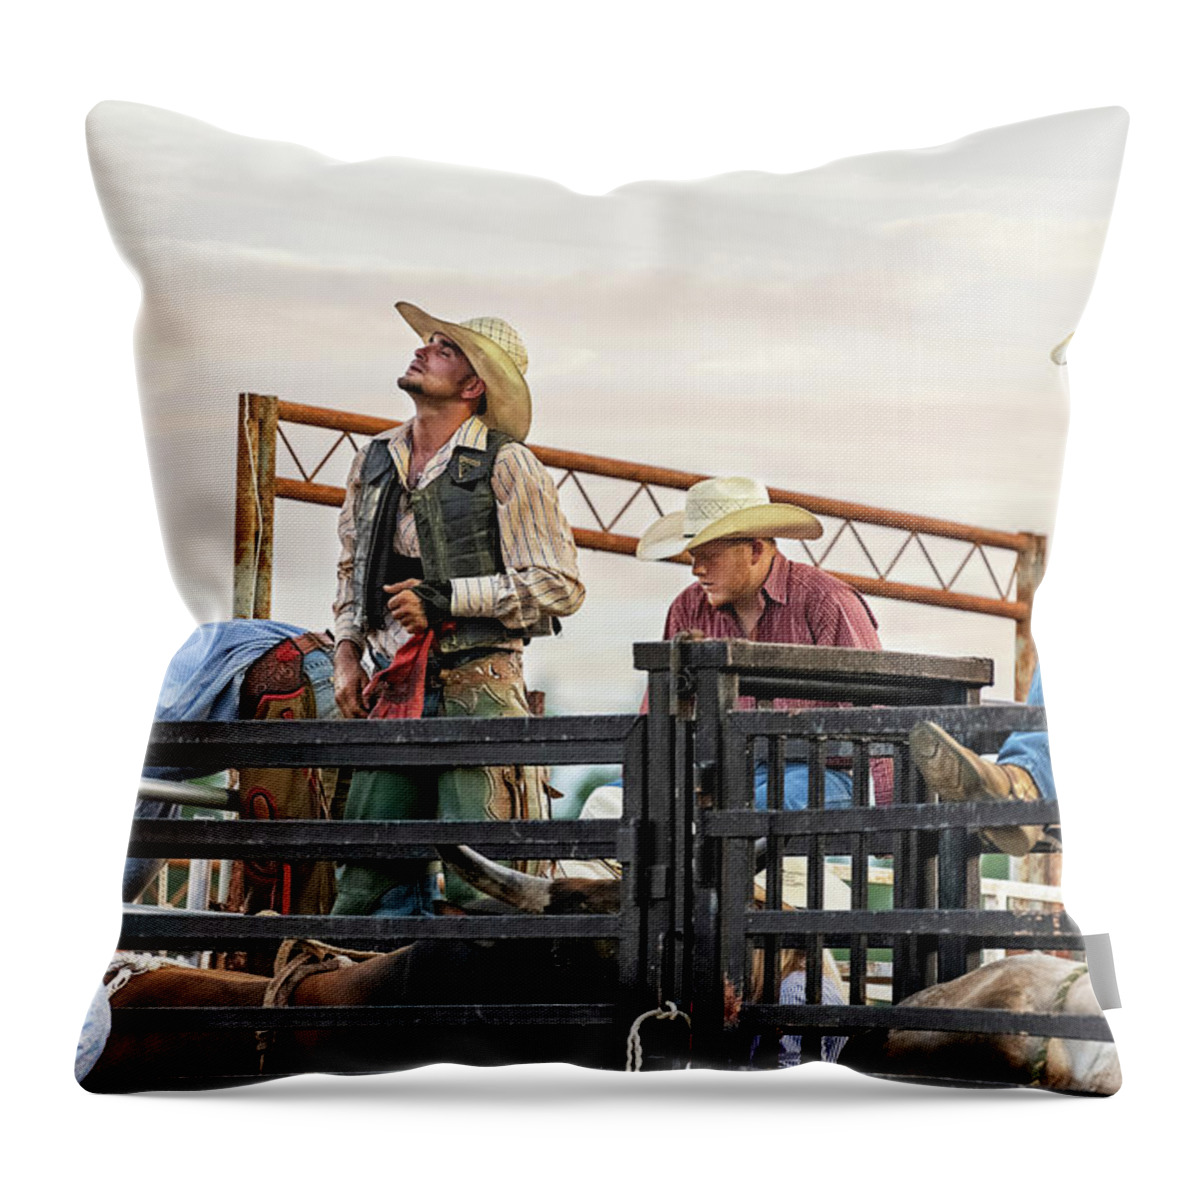 Cowboy Throw Pillow featuring the photograph Bless This Ride by Fon Denton